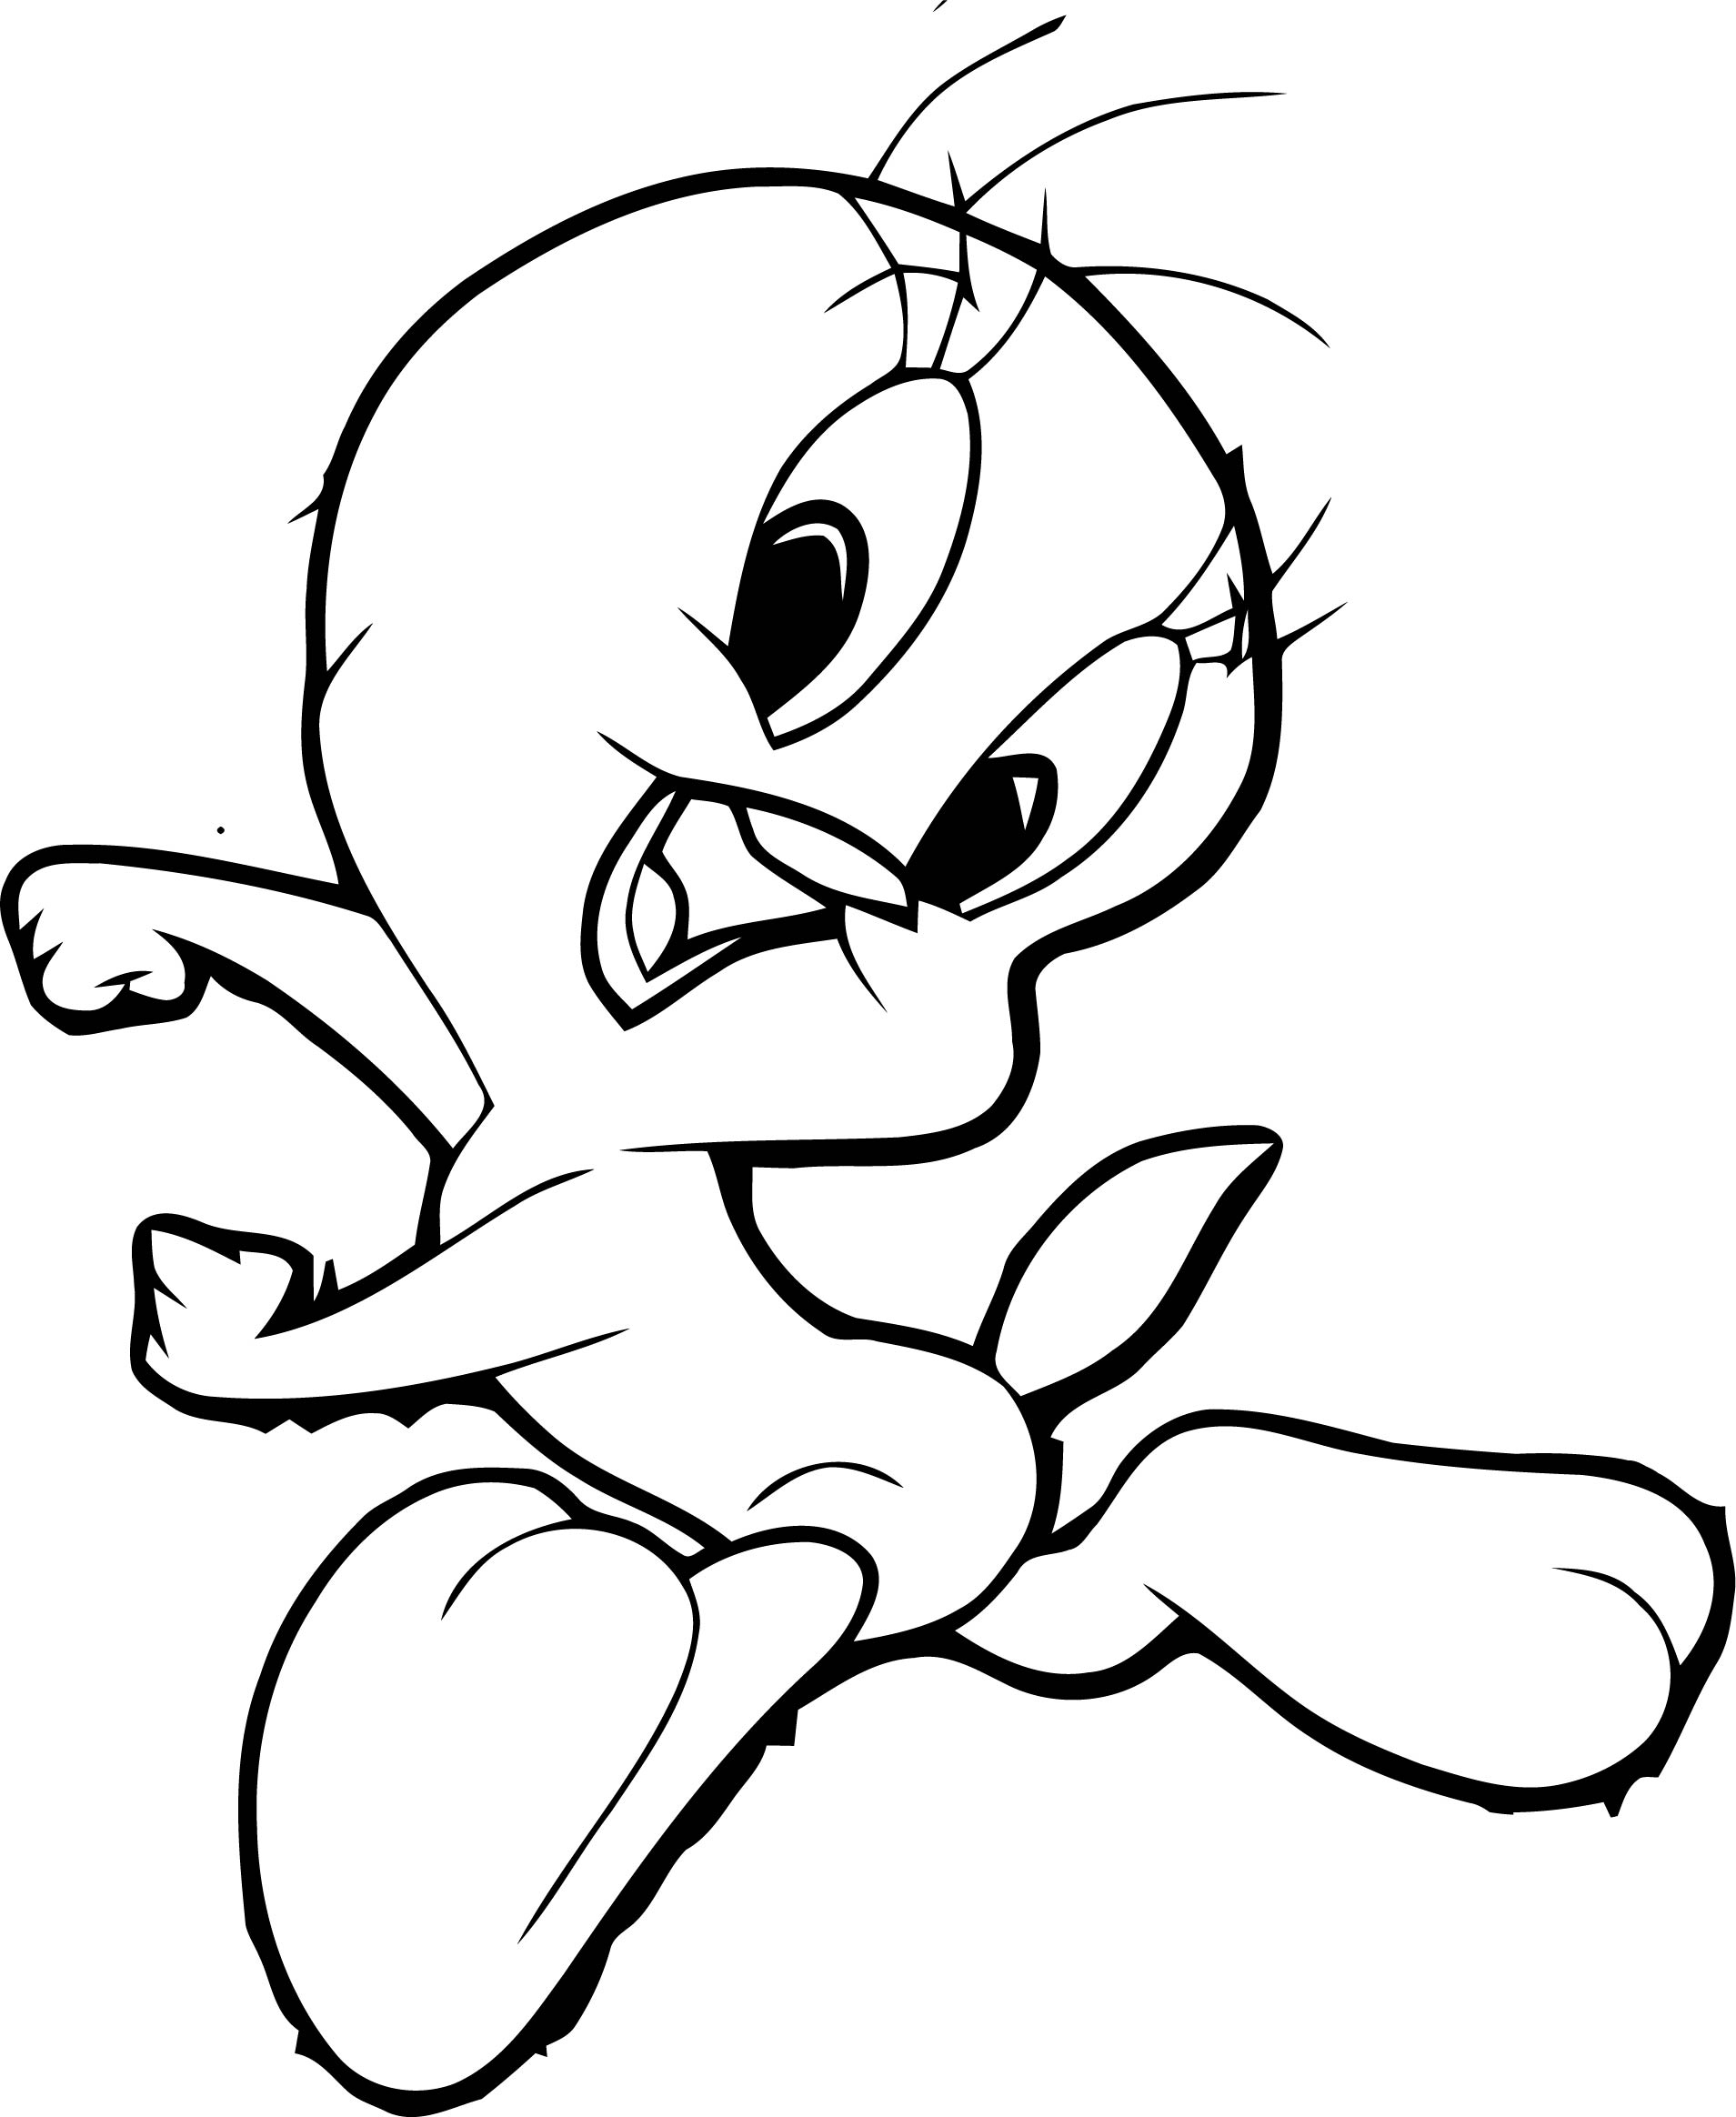 Elmer Fudd Coloring Pages Tweety Looney Tunes 7 The Looney Tunes Show Coloring Page